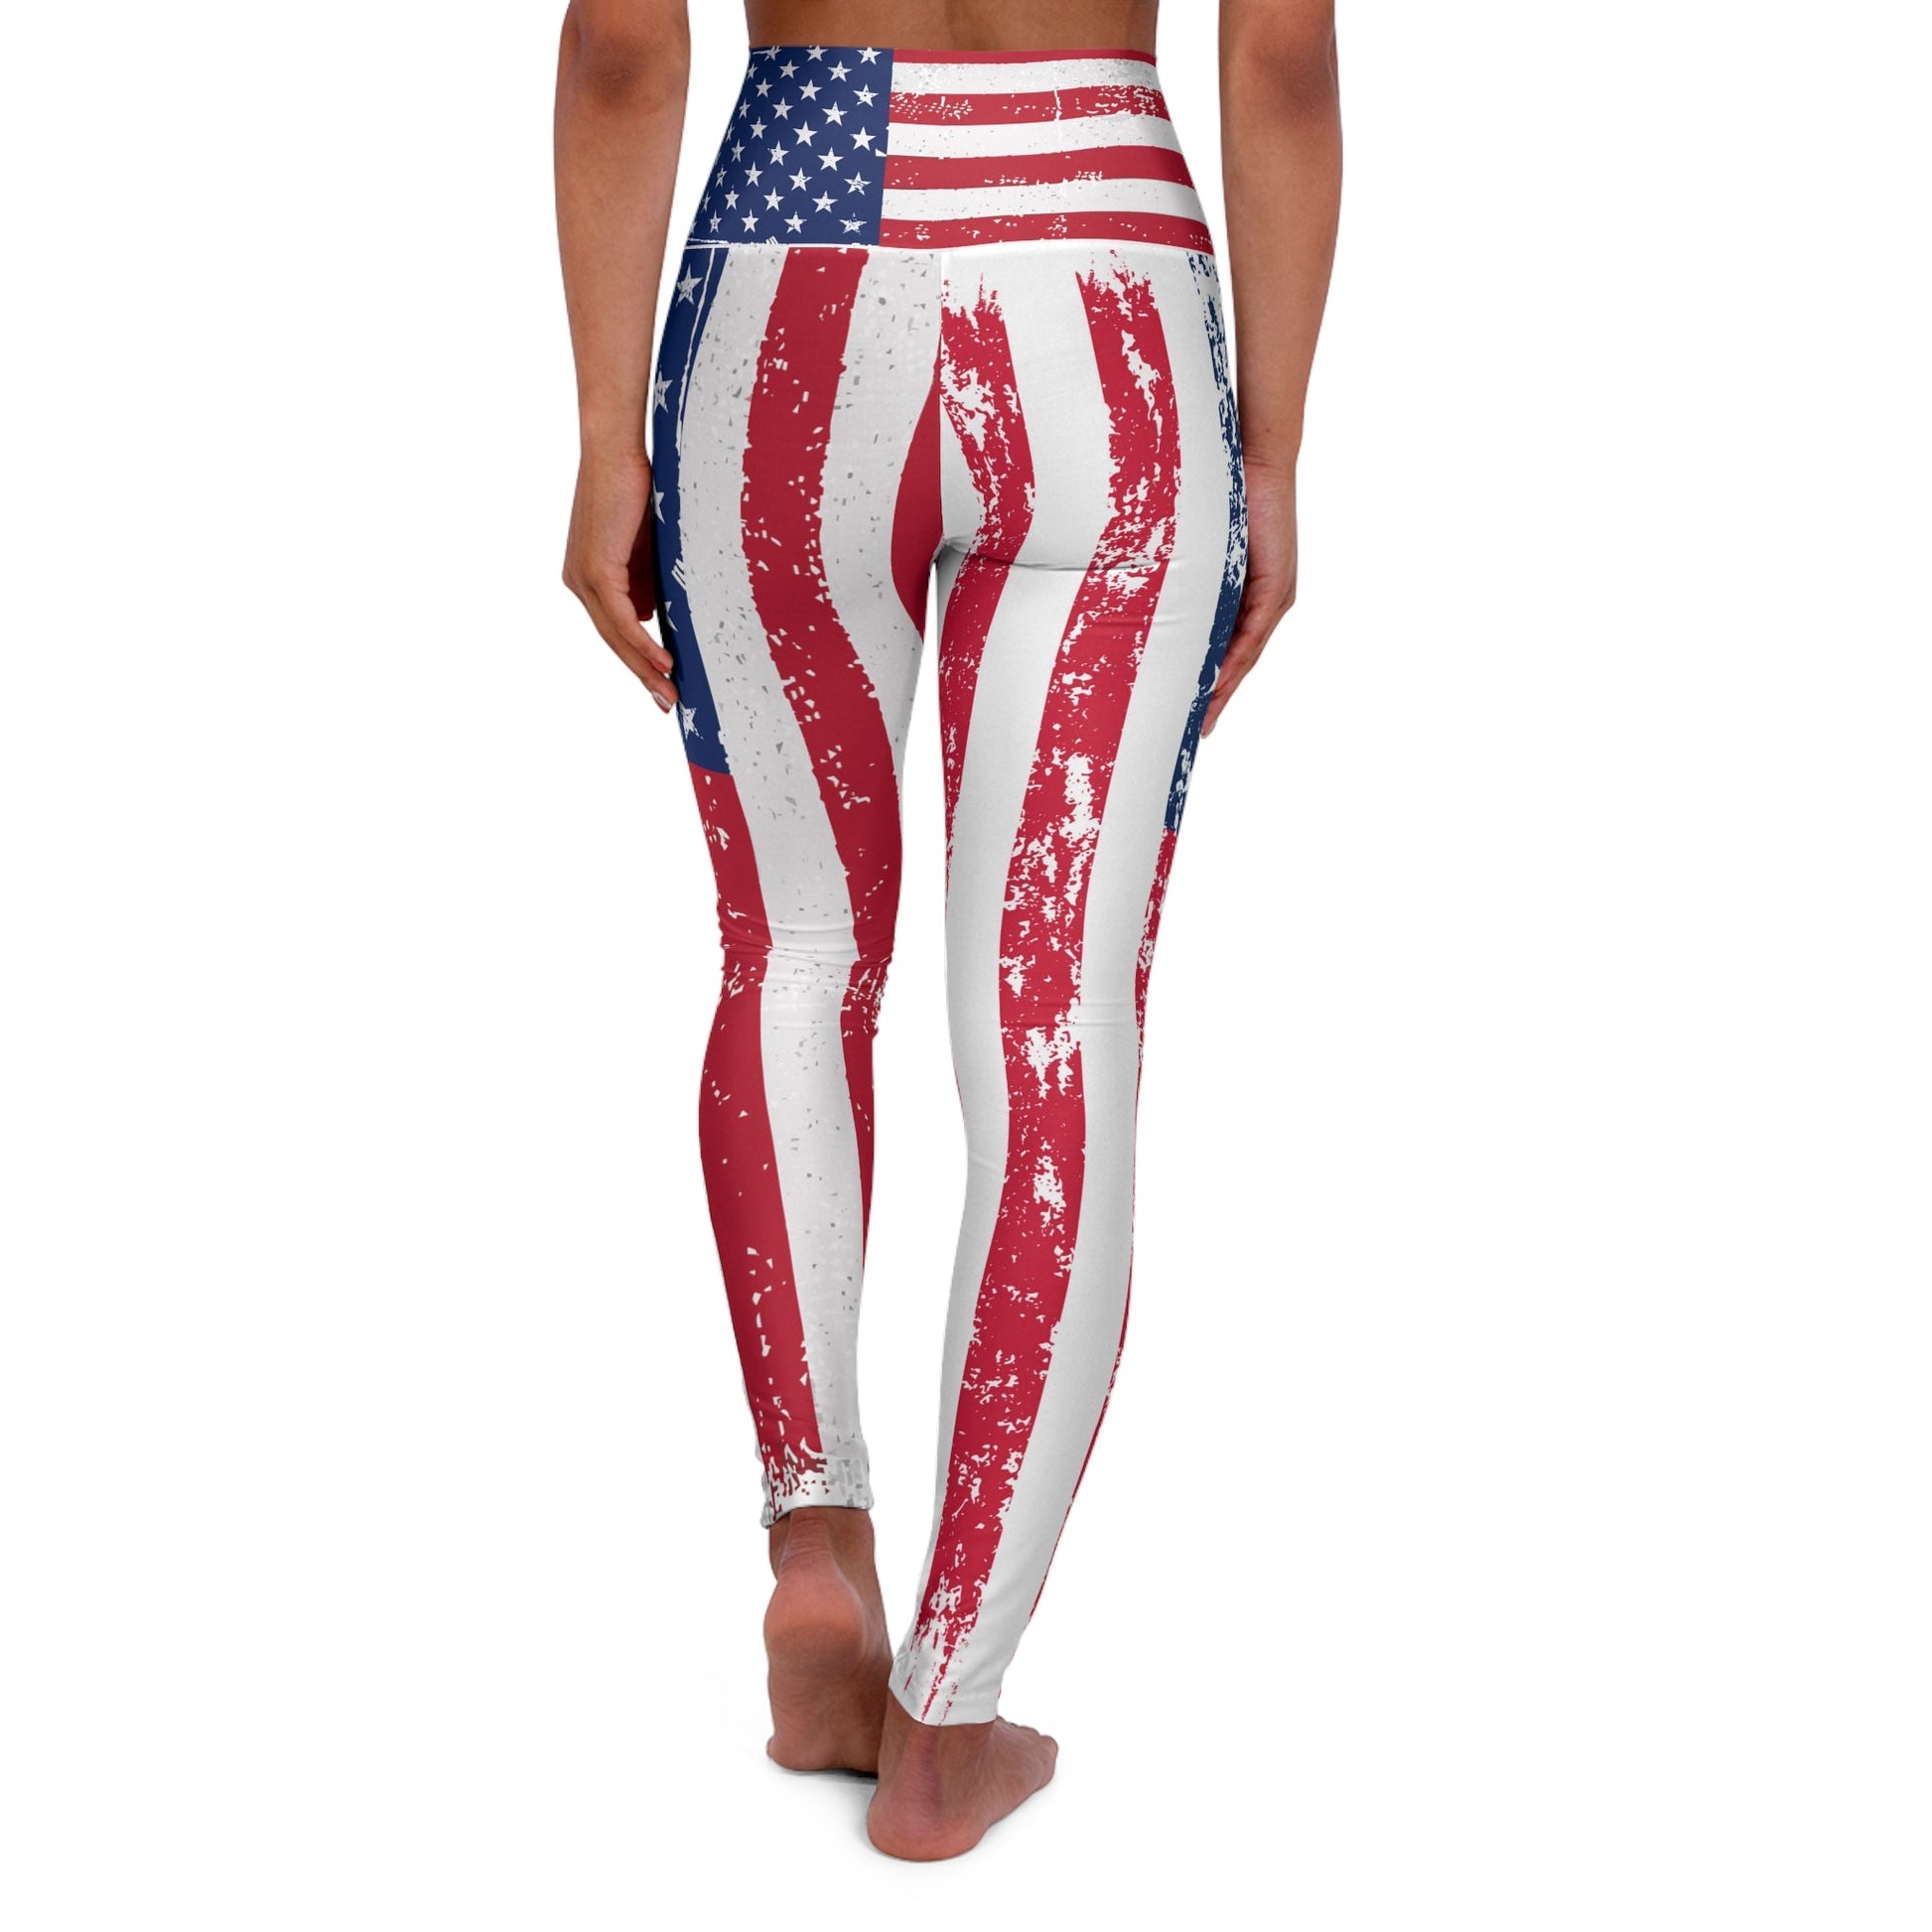 Stars and Stripes Art Leggings With Stars, Red, White and Blue, High Waisted - FlooredByArt